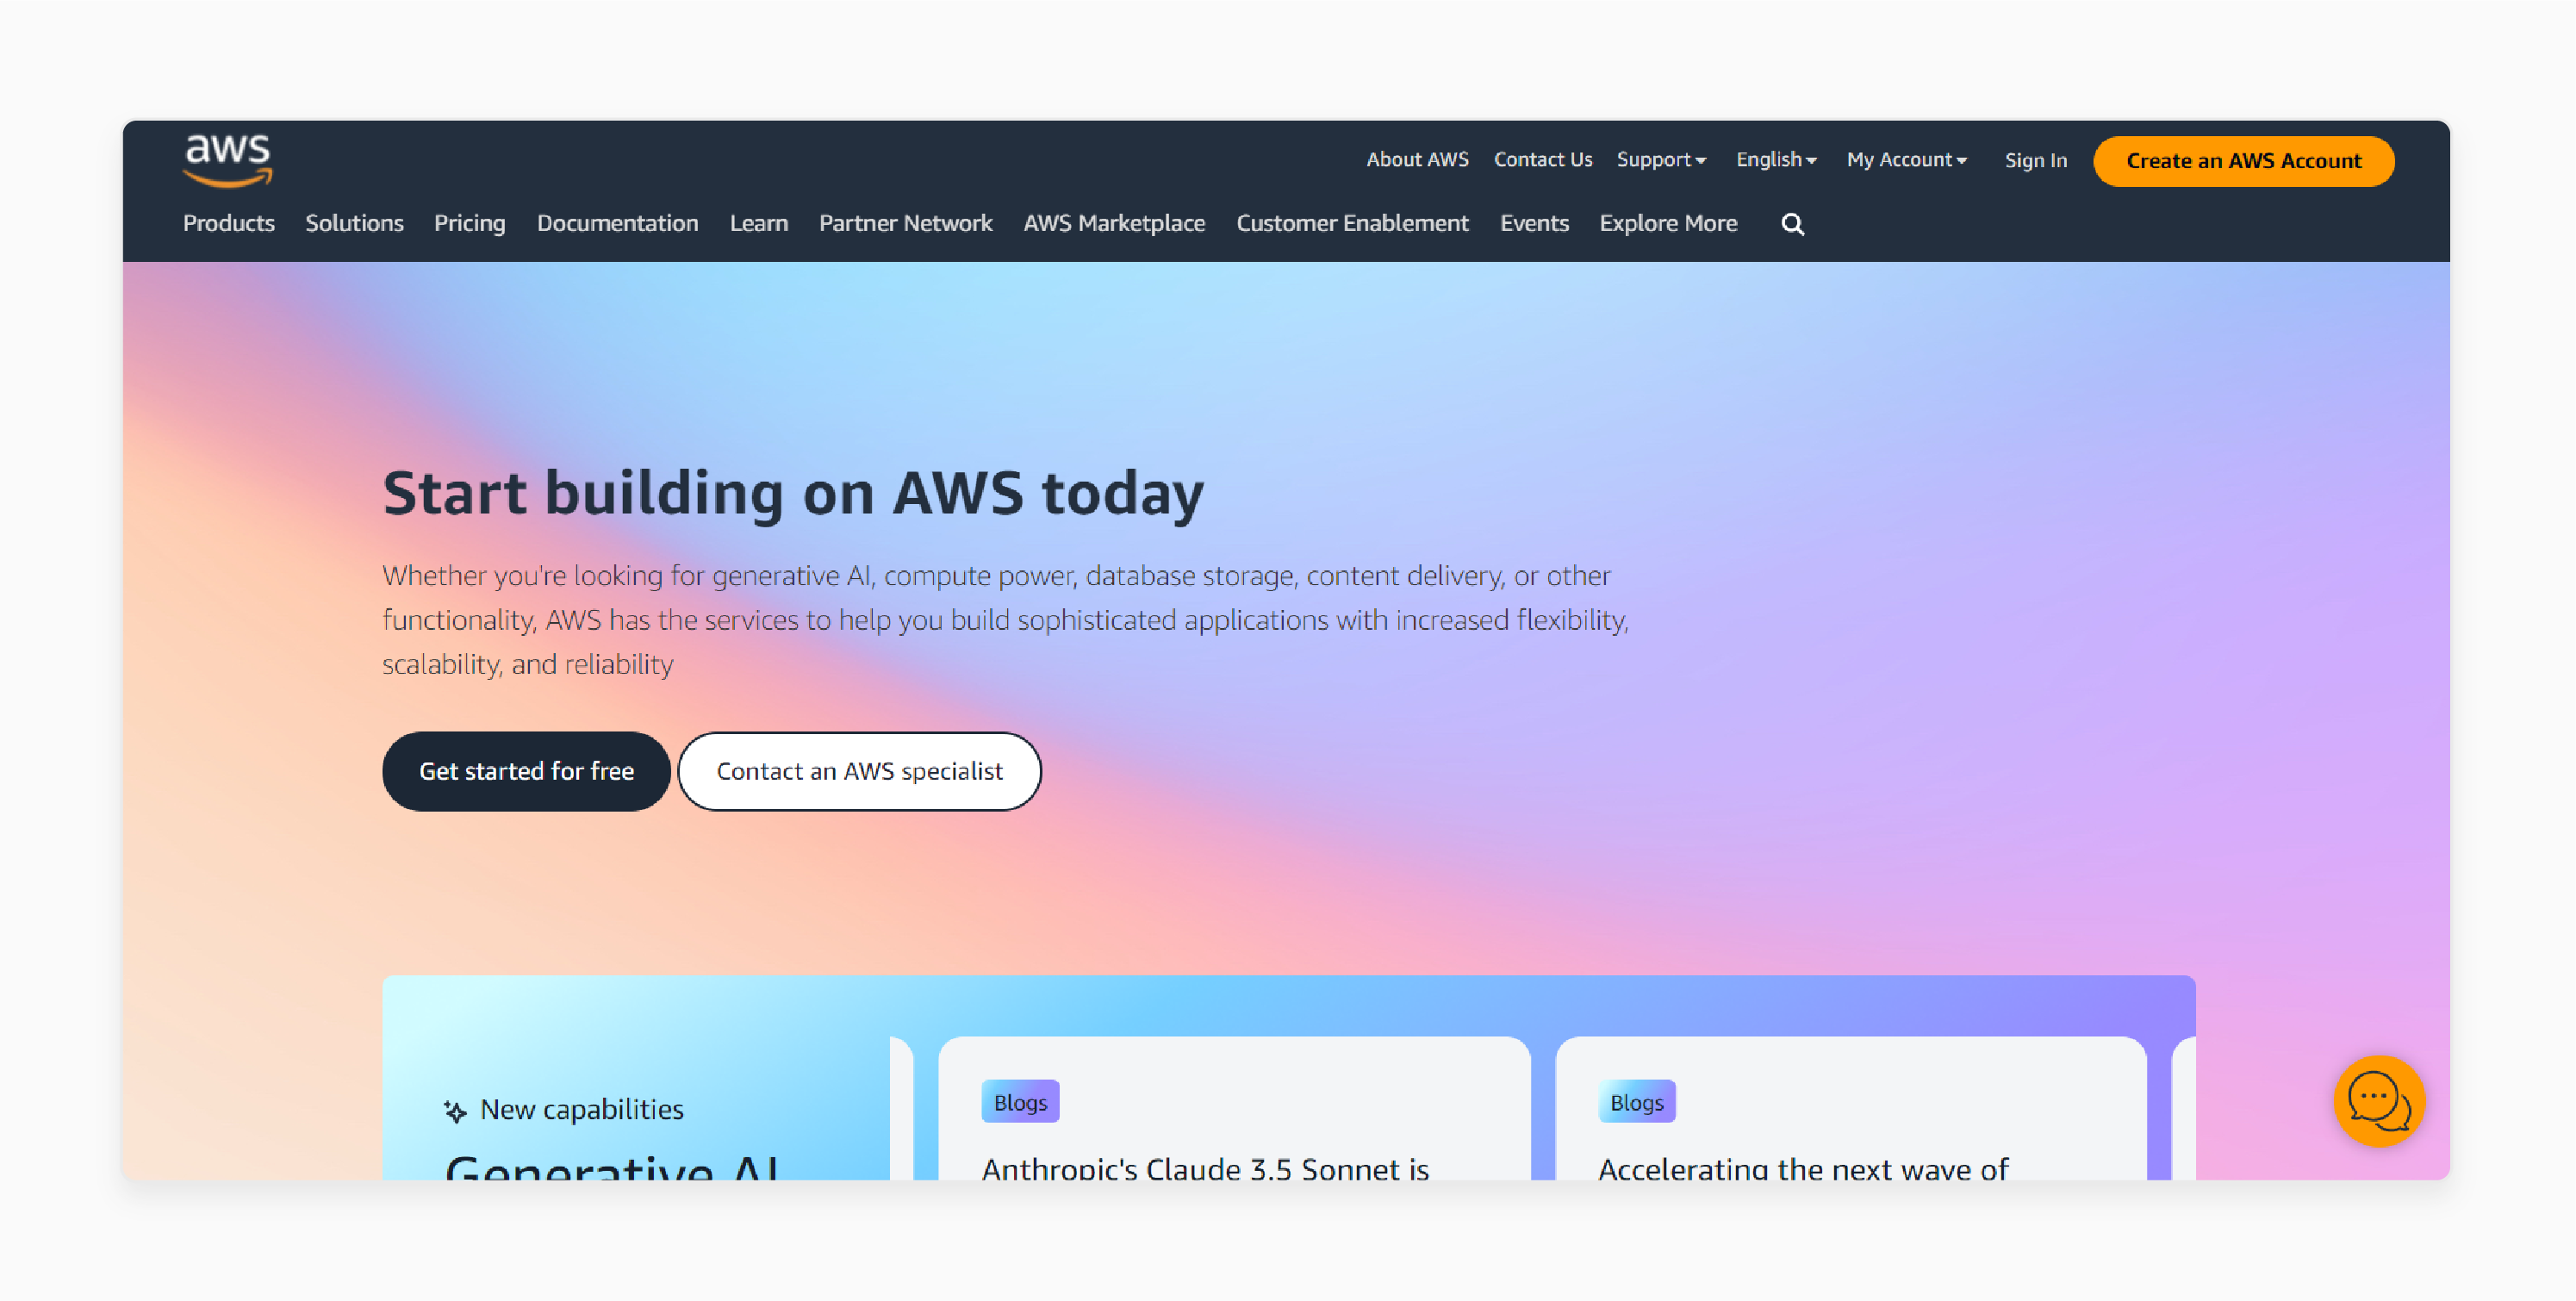 Cloud Hosting Service Providers: Amazon Web Services